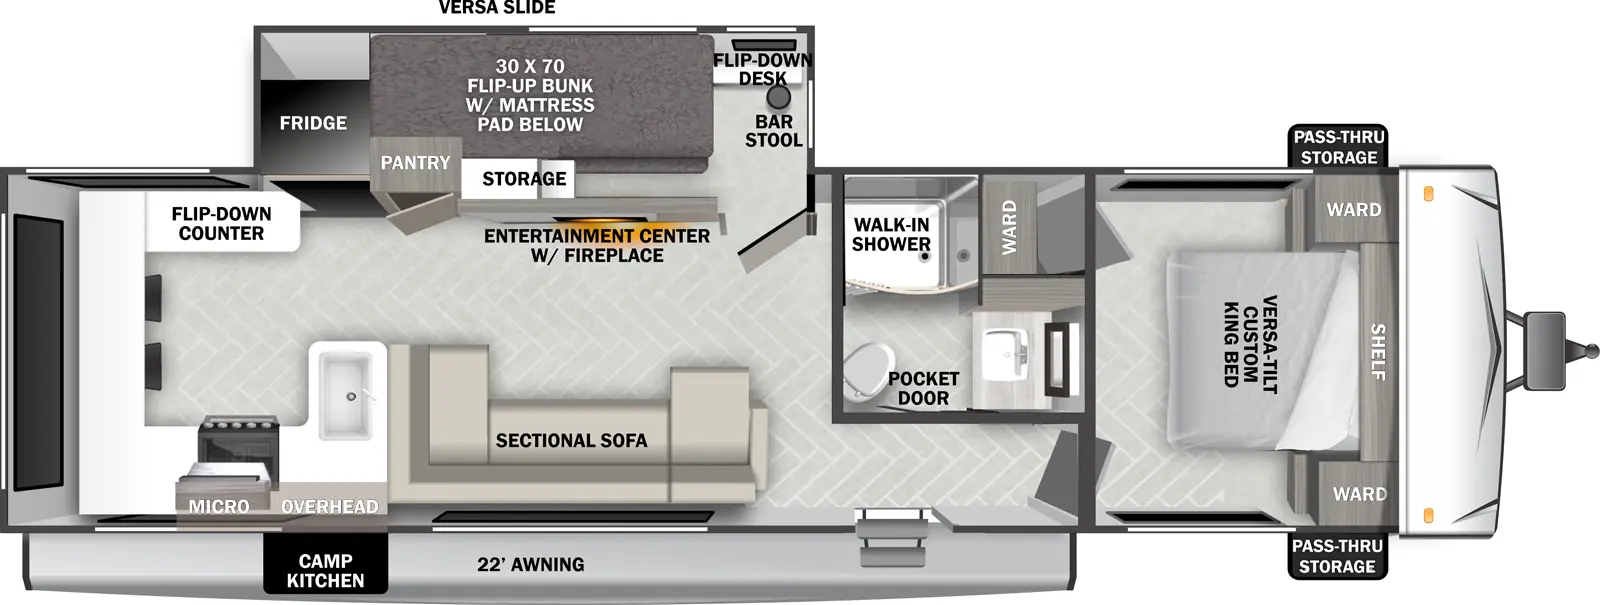 The T29VIEW has one slideout and one entry. Exterior features a 22 foot awning, exterior camp kitchen, and front pass-thru storage. Interior layout front to back: foot facing versa-tilt custom king bed with overhead shelf, wardrobes on each side, and off-door side wardrobe; off-door side full bathroom with walk-in shower and pocket-door entry; entry door outside of bathroom; off-door side slideout with versa slide (a flip-down desk with barstool, and storage cubbies, and flip-up bunk with mattress pad below behind an entertainment center with fireplace), pantry and refrigerator; door side sectional sofa; peninsula kitchen counter with sink wraps to door side with microwave, overhead cabinet and cooktop, and continues to wrap to rear wall and off-door side with dining seating.
